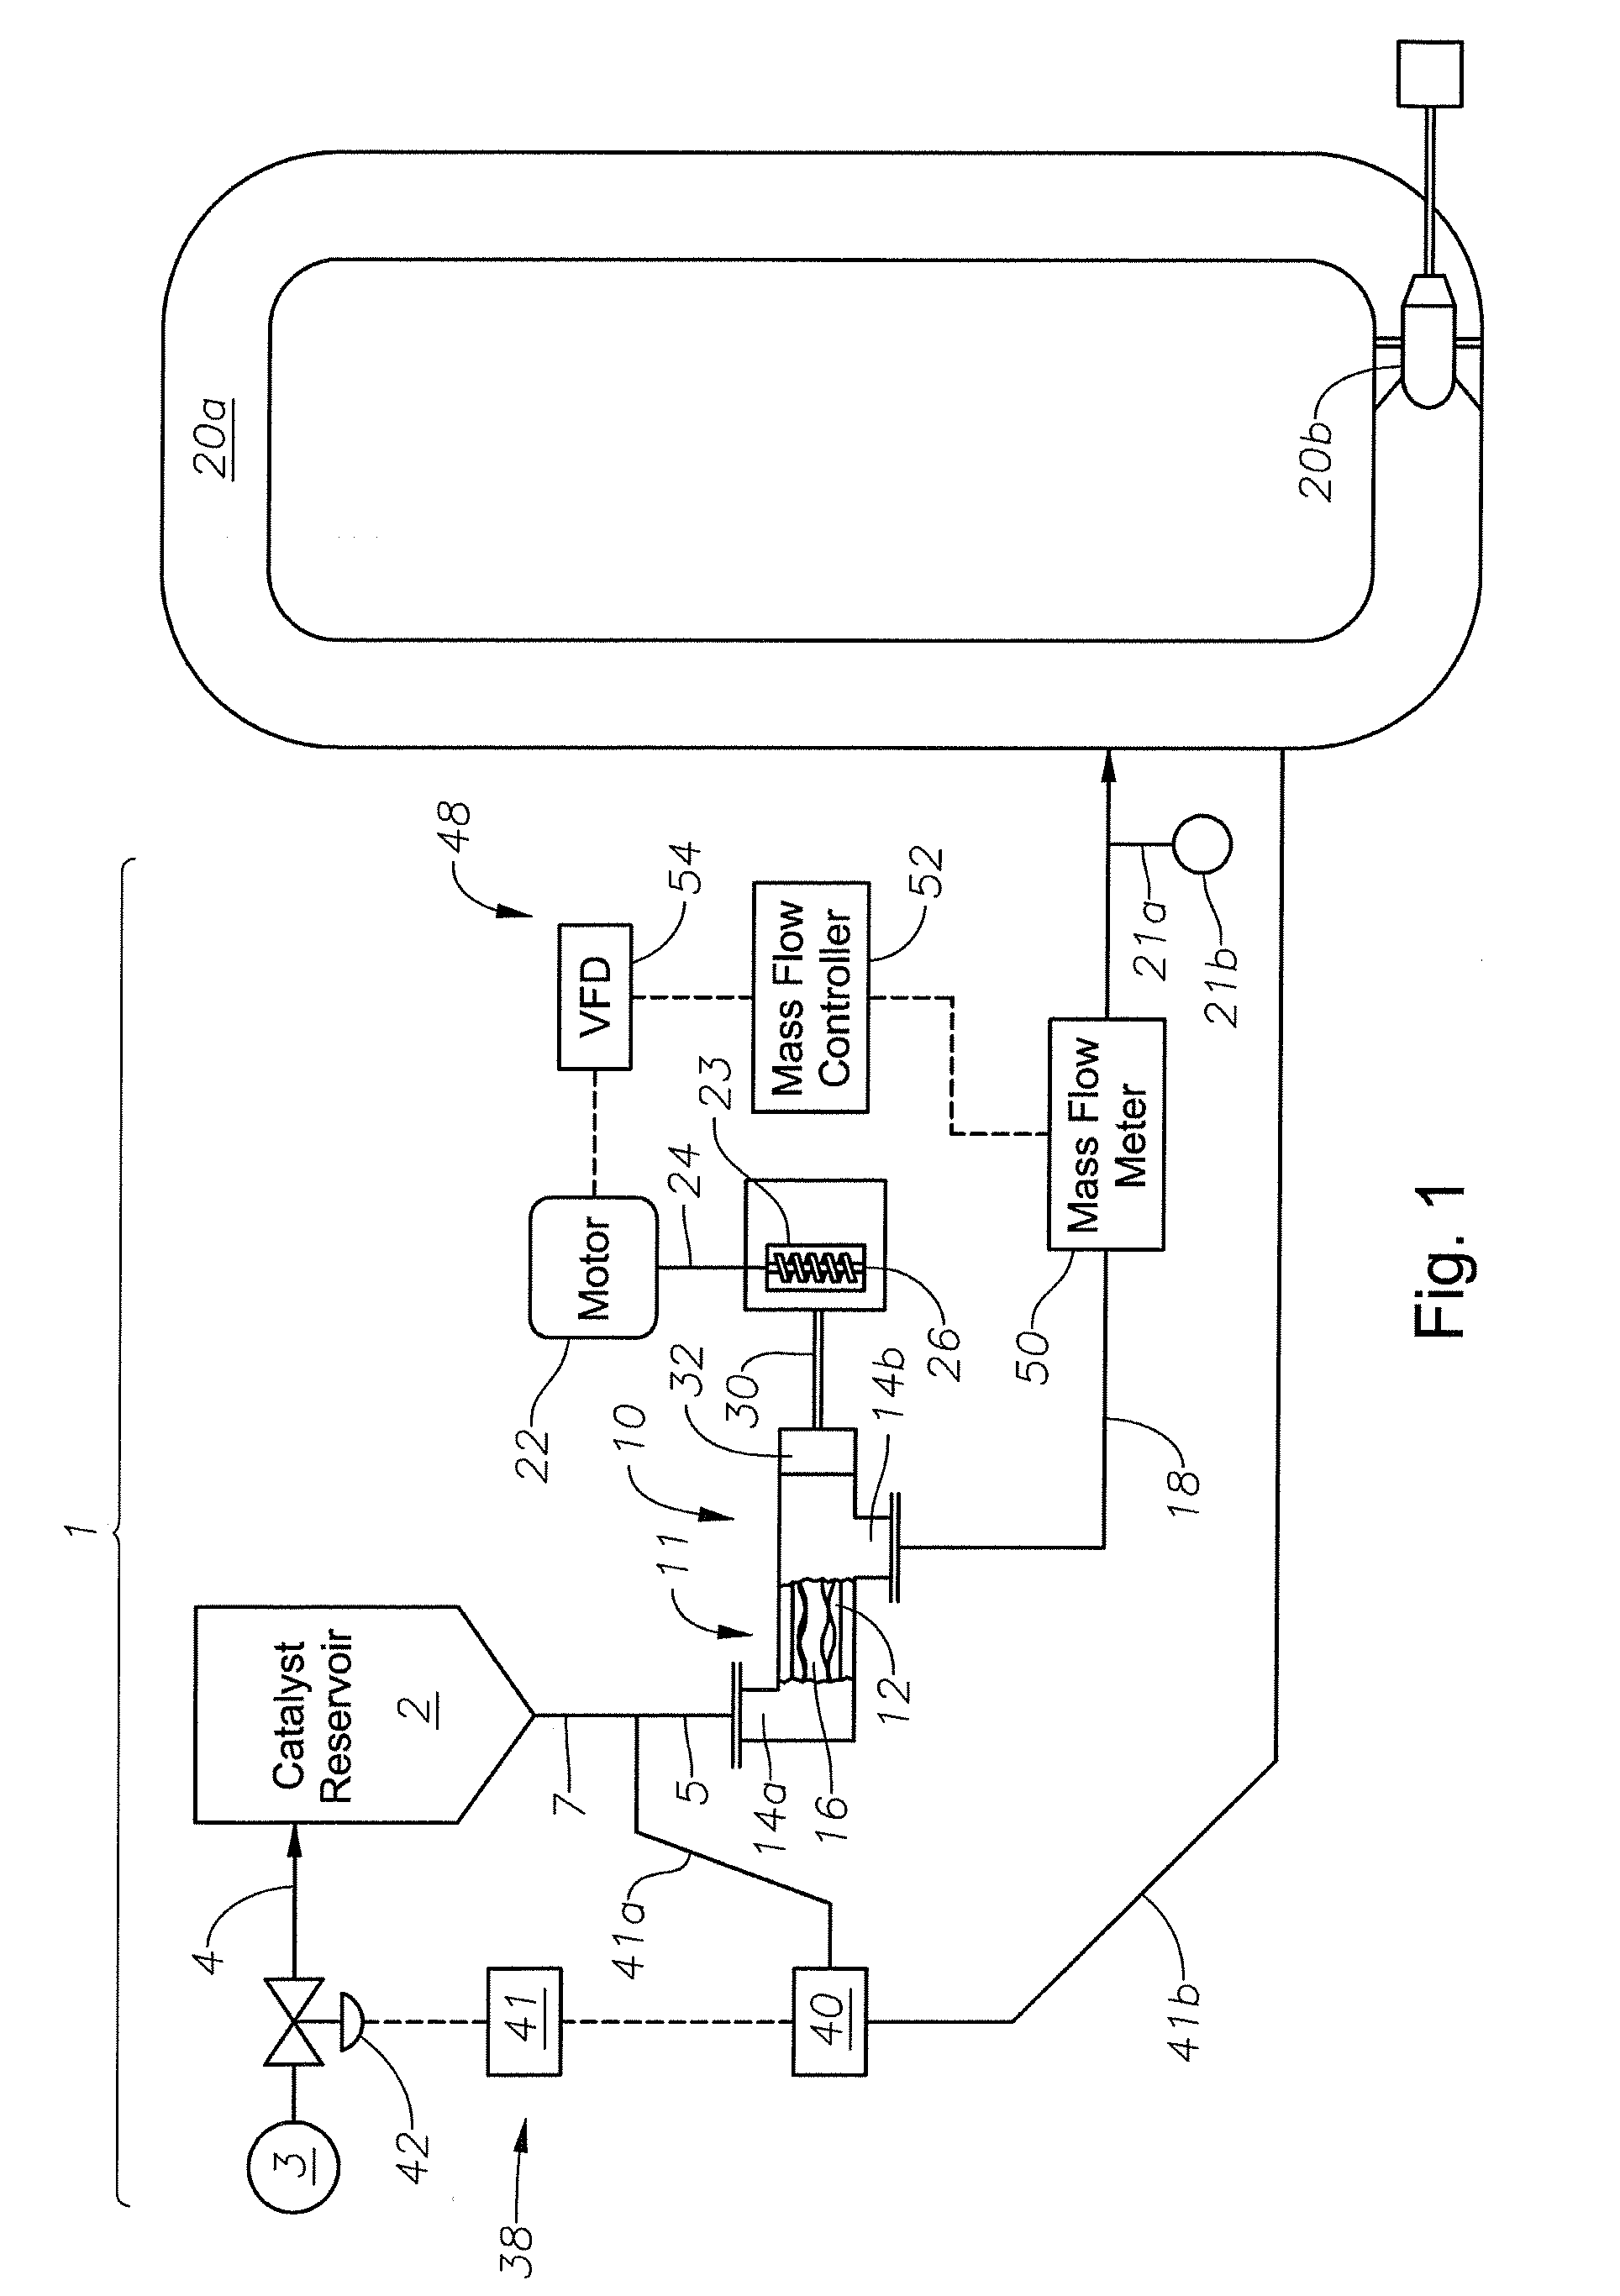 System and Method for Providing a Continuous Flow of Catalyst Into a Polyolefin Reactor